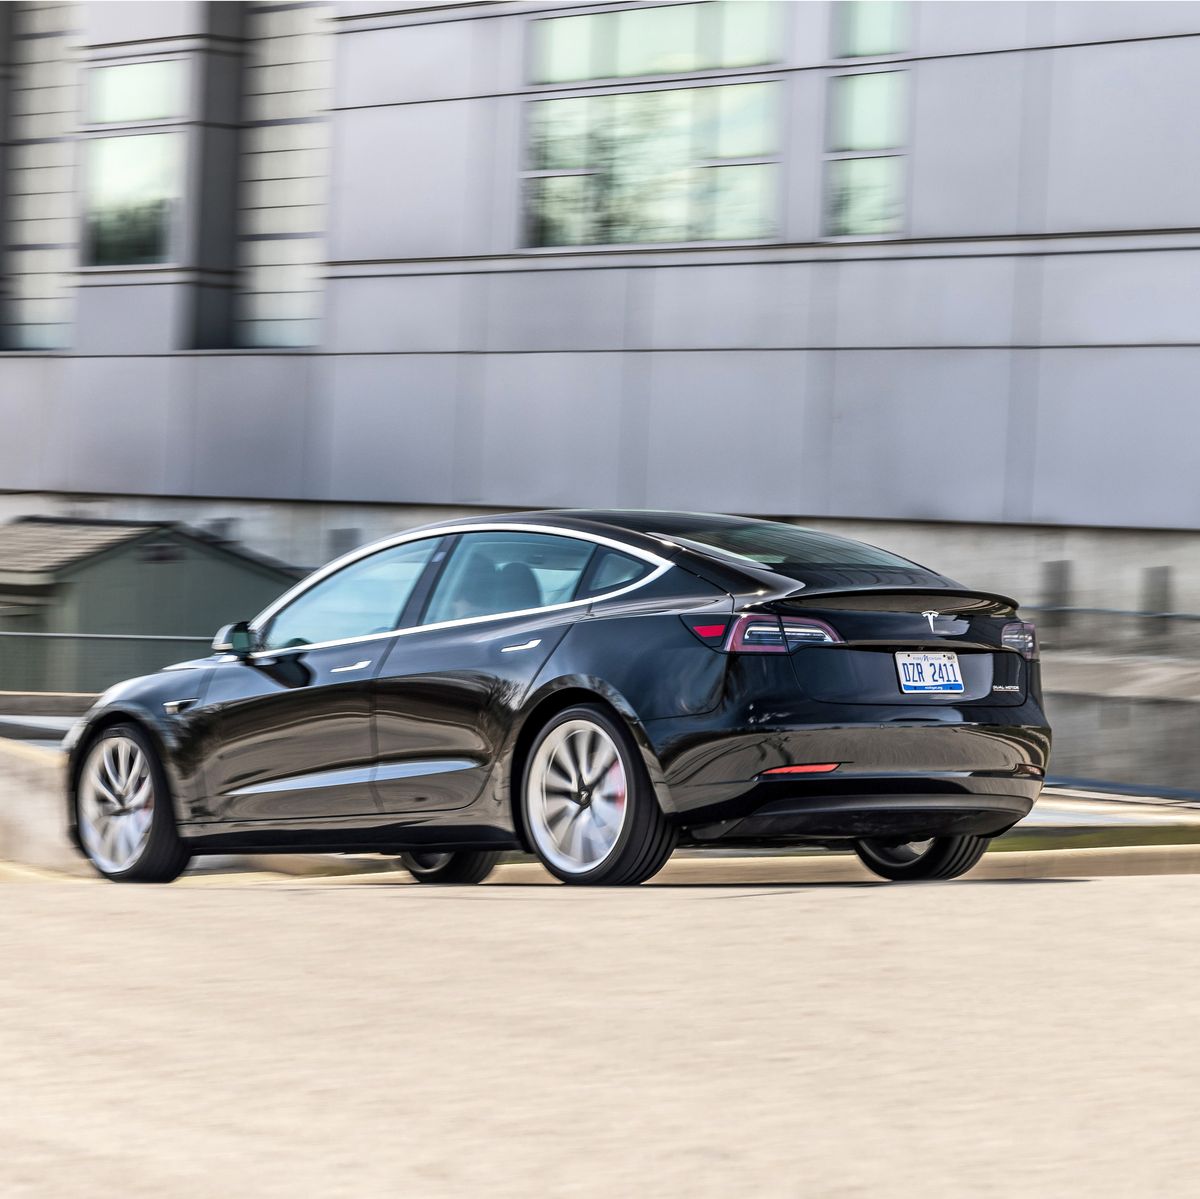 Tested: 2019 Tesla Model 3 Performance Hits 60 in 3.1 Seconds